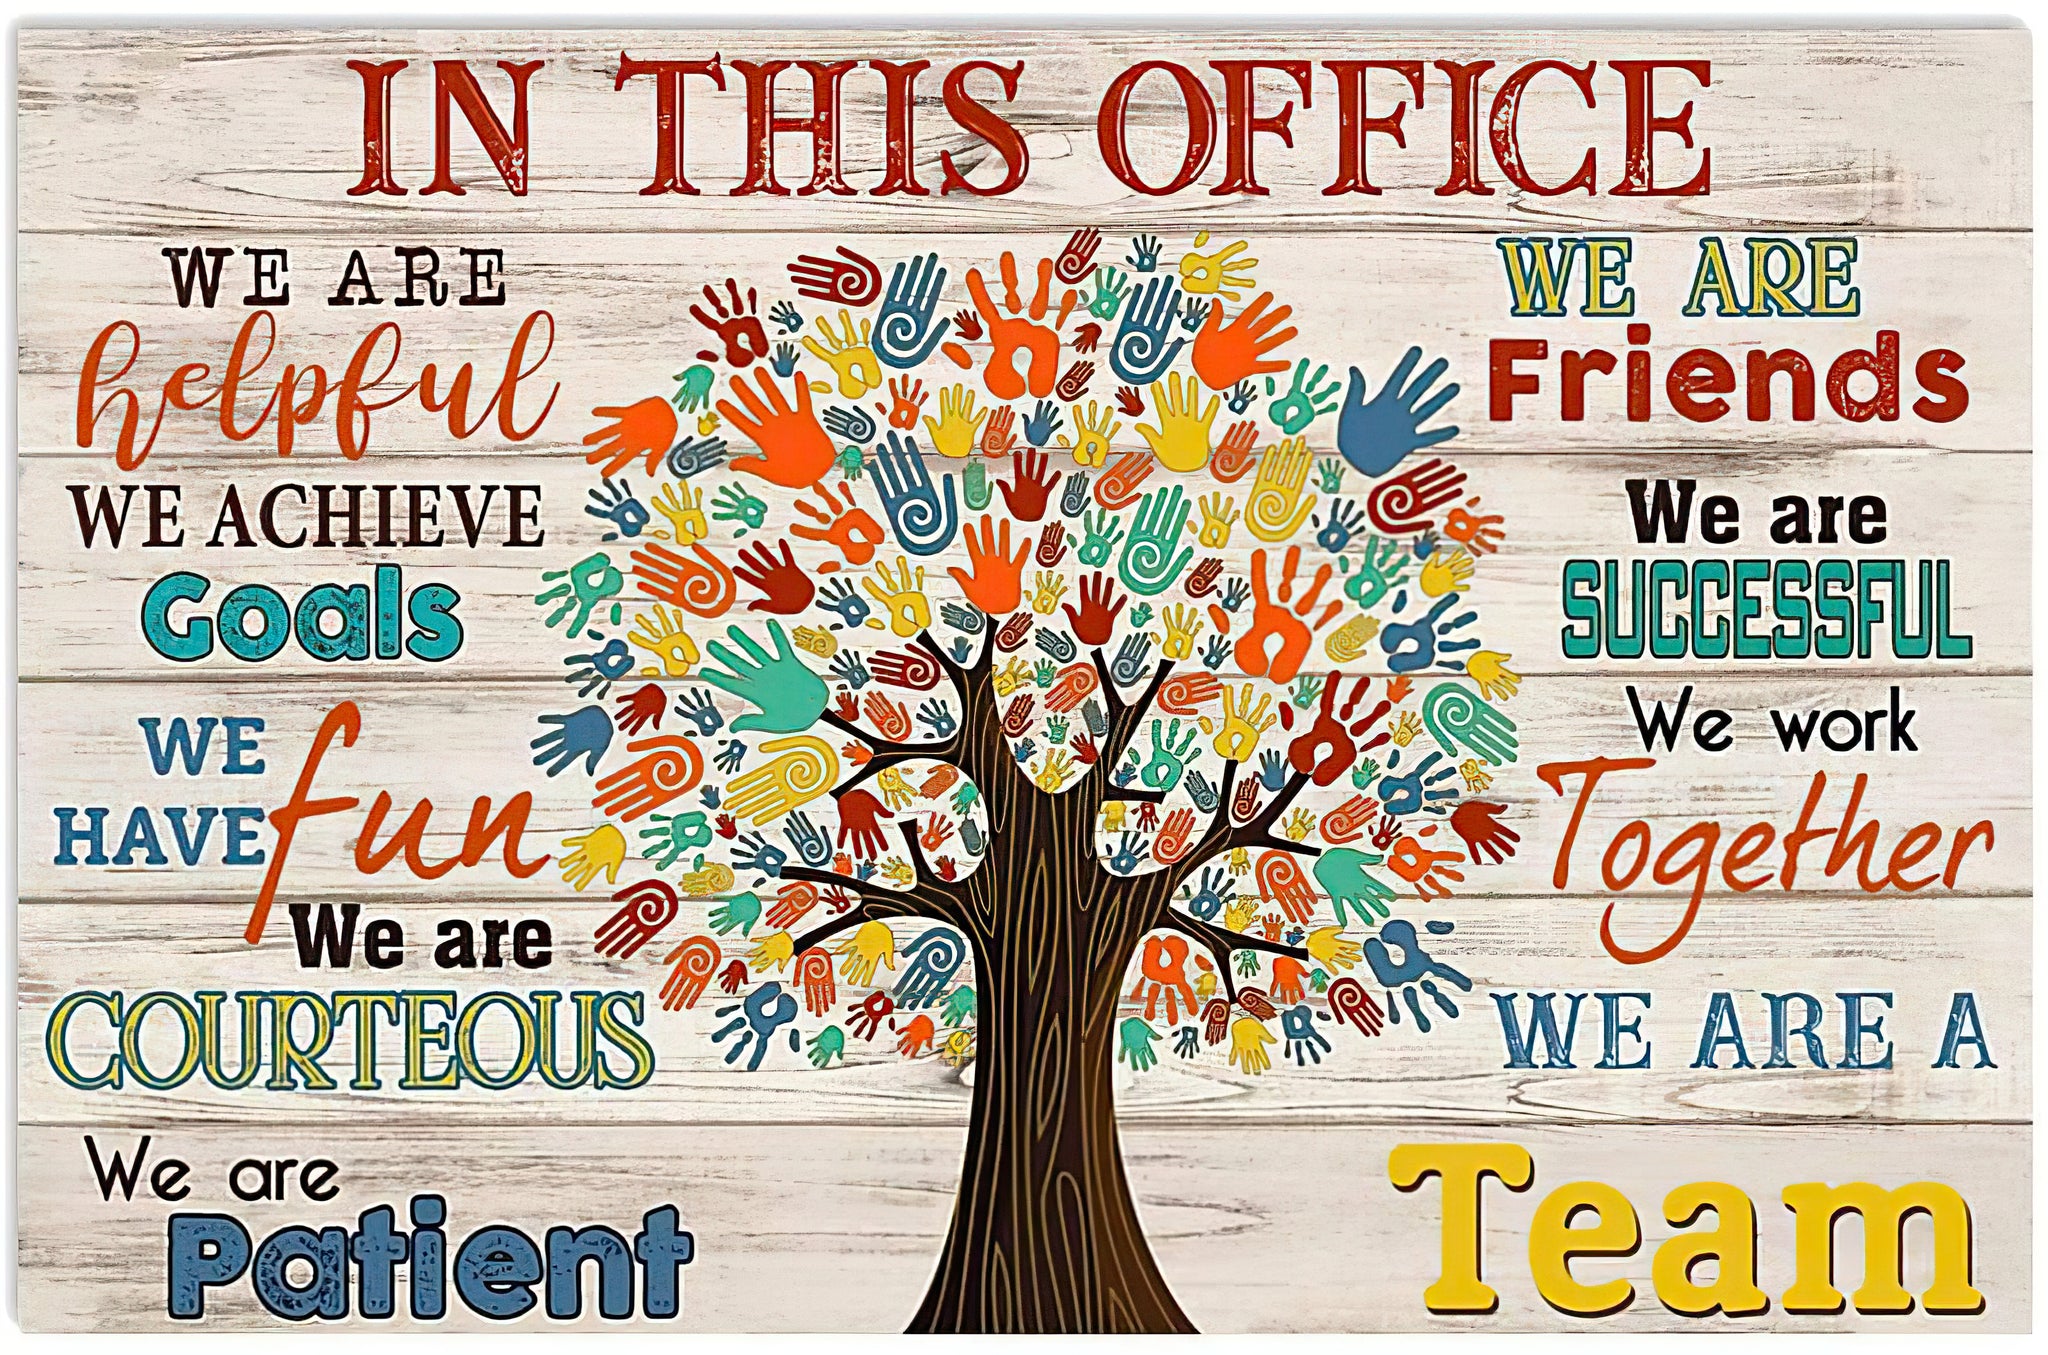 Social Worker In This Office We Are Helpful We Are Friends We Are A Team Landscape